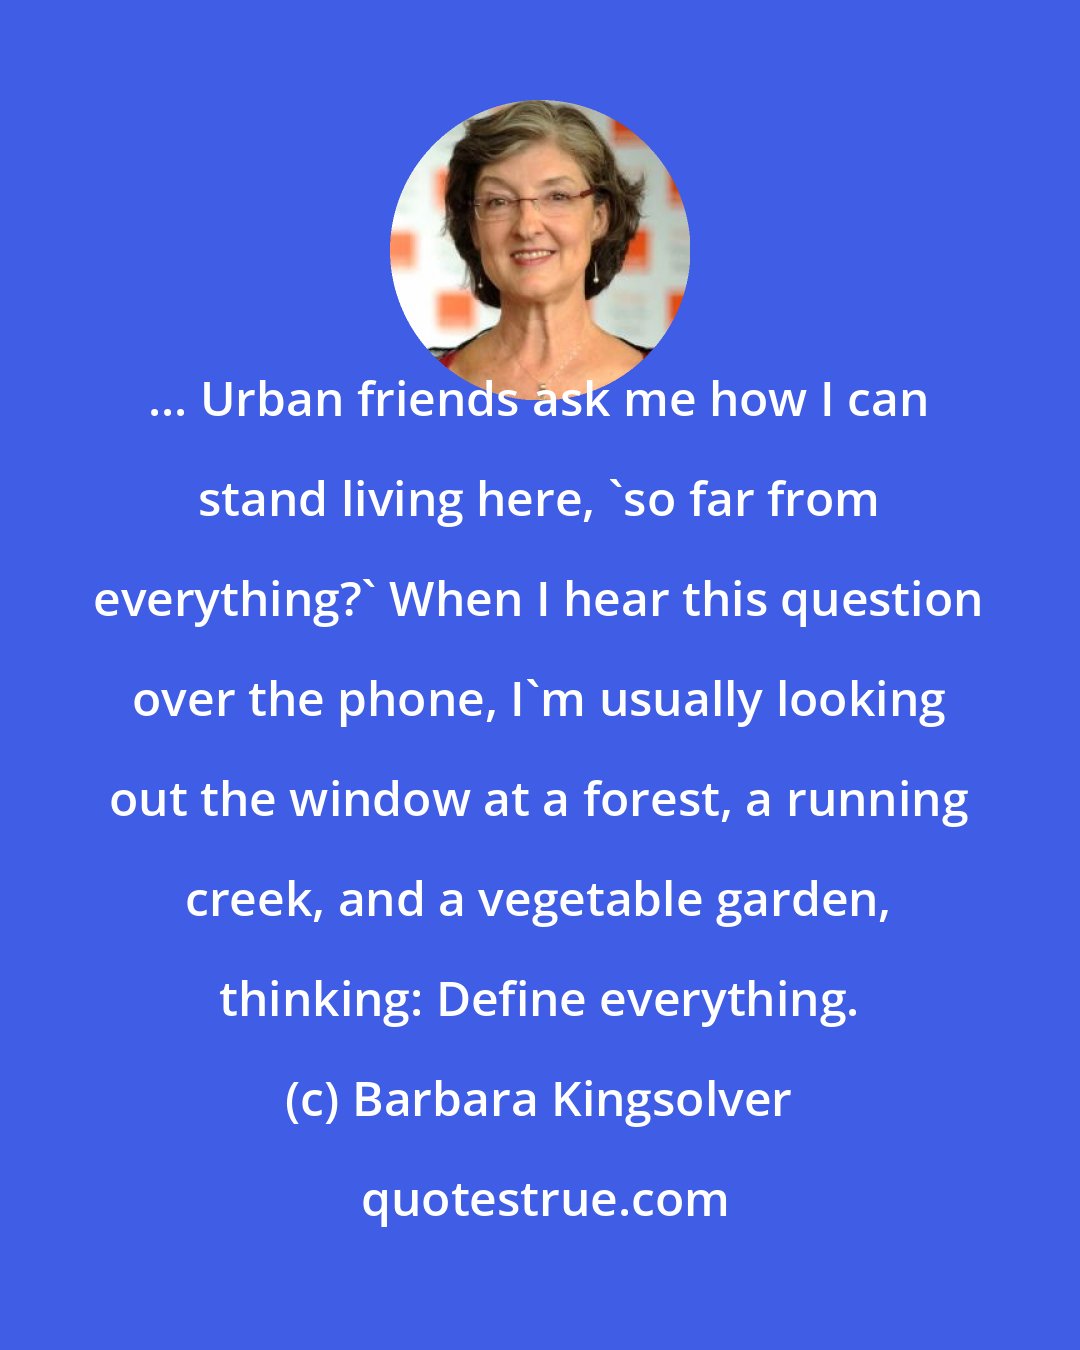 Barbara Kingsolver: ... Urban friends ask me how I can stand living here, 'so far from everything?' When I hear this question over the phone, I'm usually looking out the window at a forest, a running creek, and a vegetable garden, thinking: Define everything.